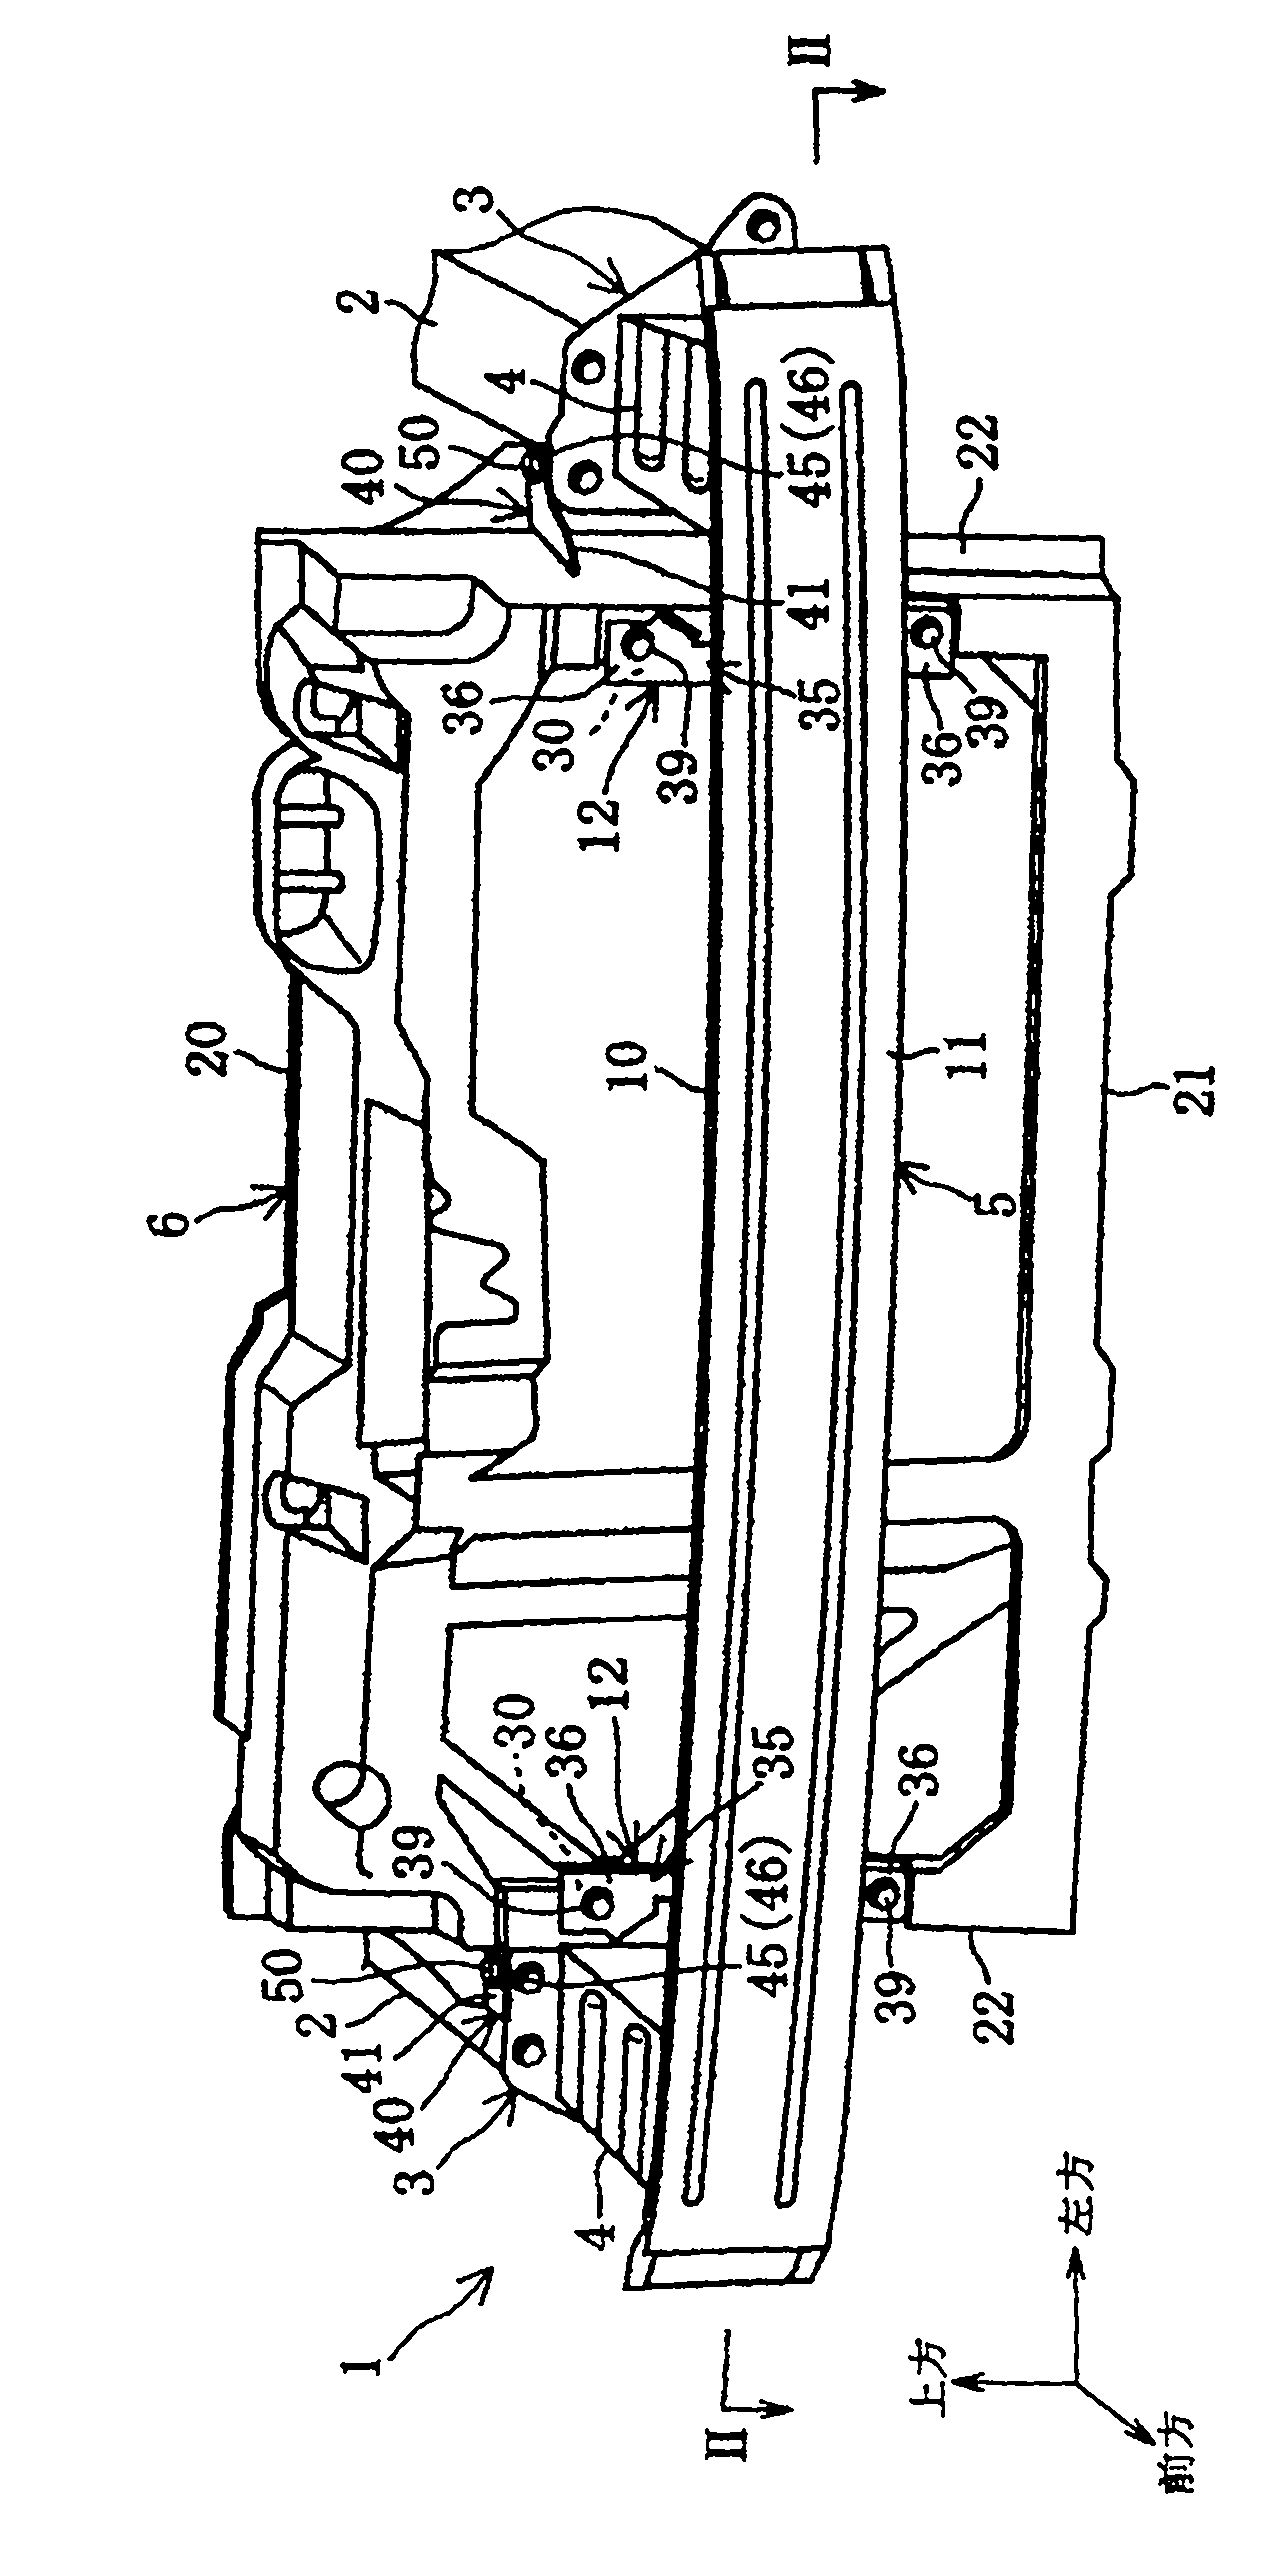 Auto heat radiator frame support structure